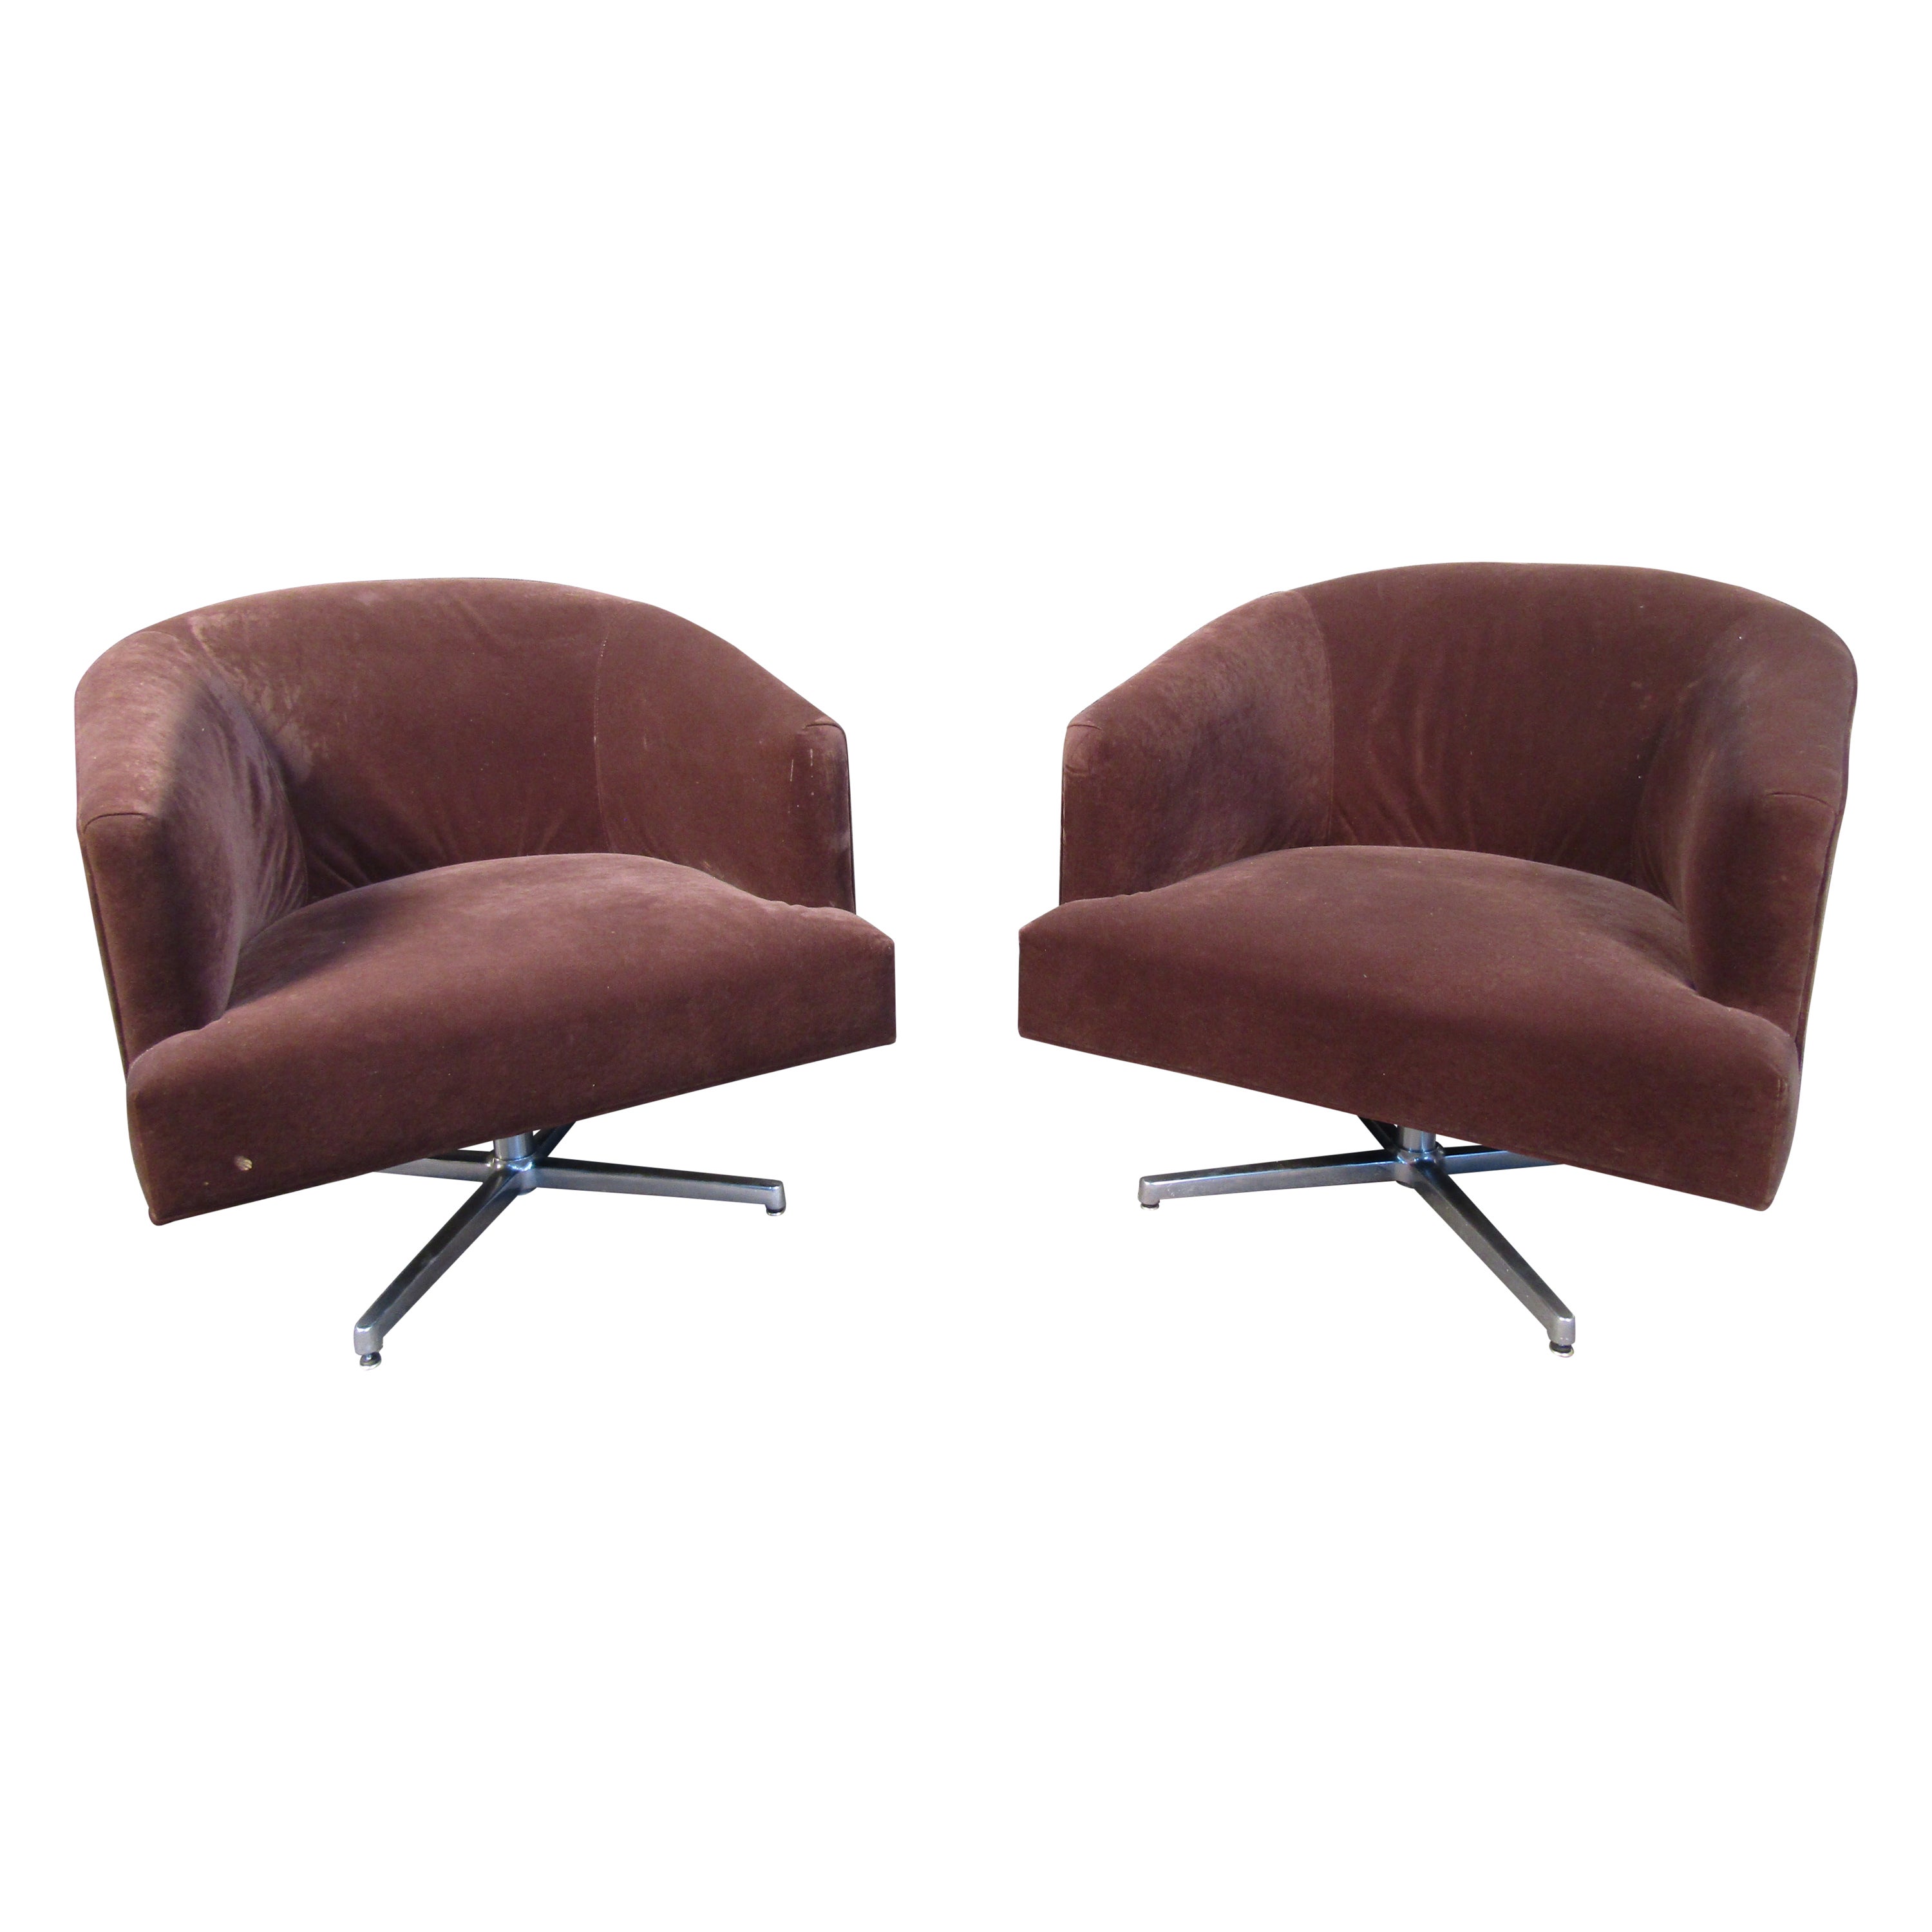 Pair of Suede Swivel Chairs